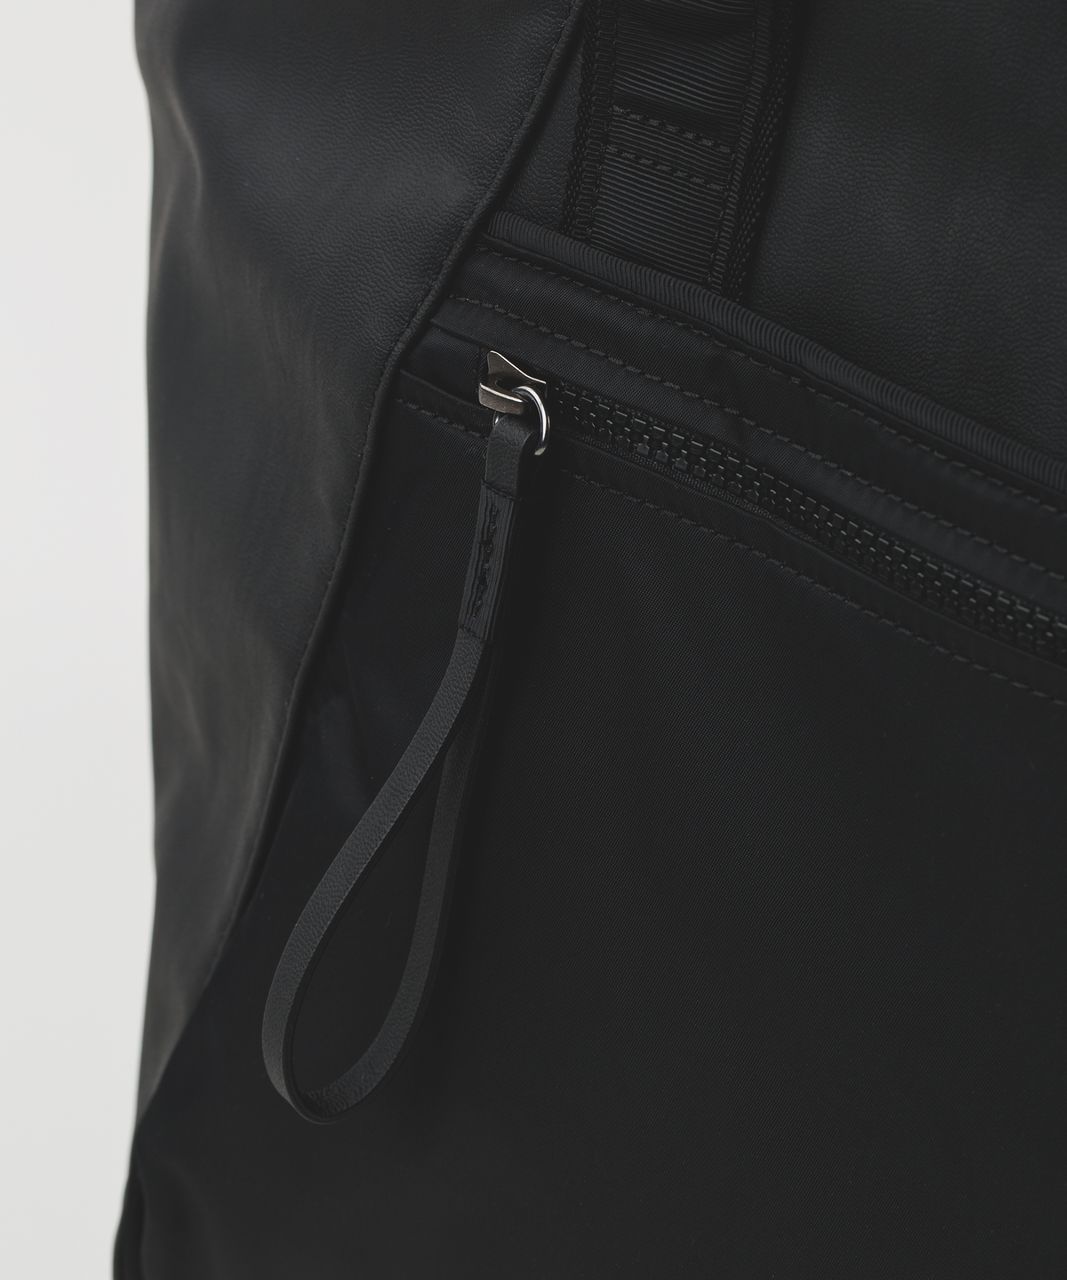 Lululemon Free To Be Bag - Black (First Release)